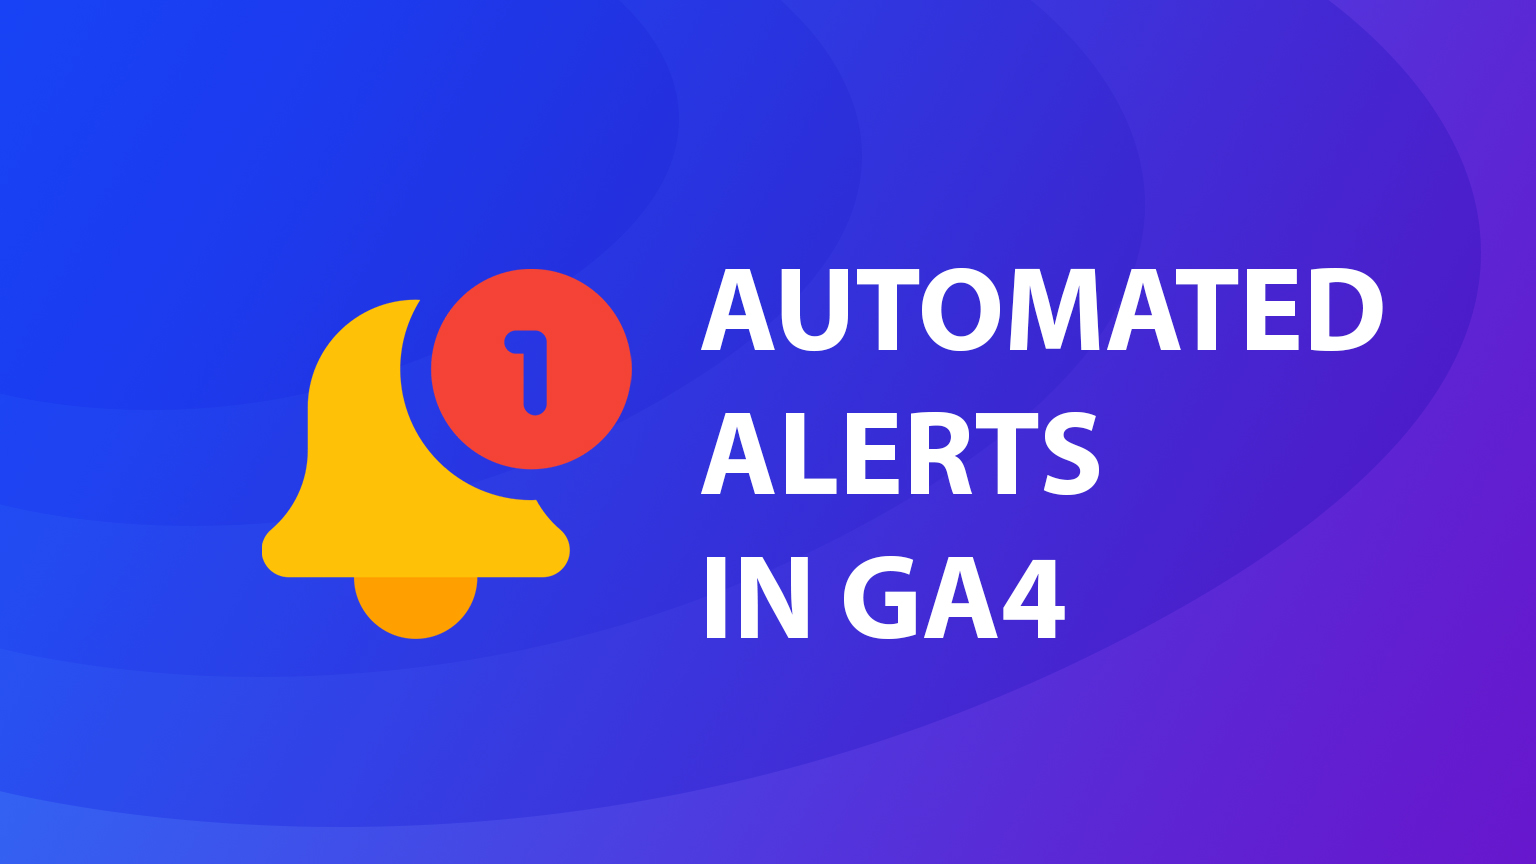 Automated insights and alerts in GA4